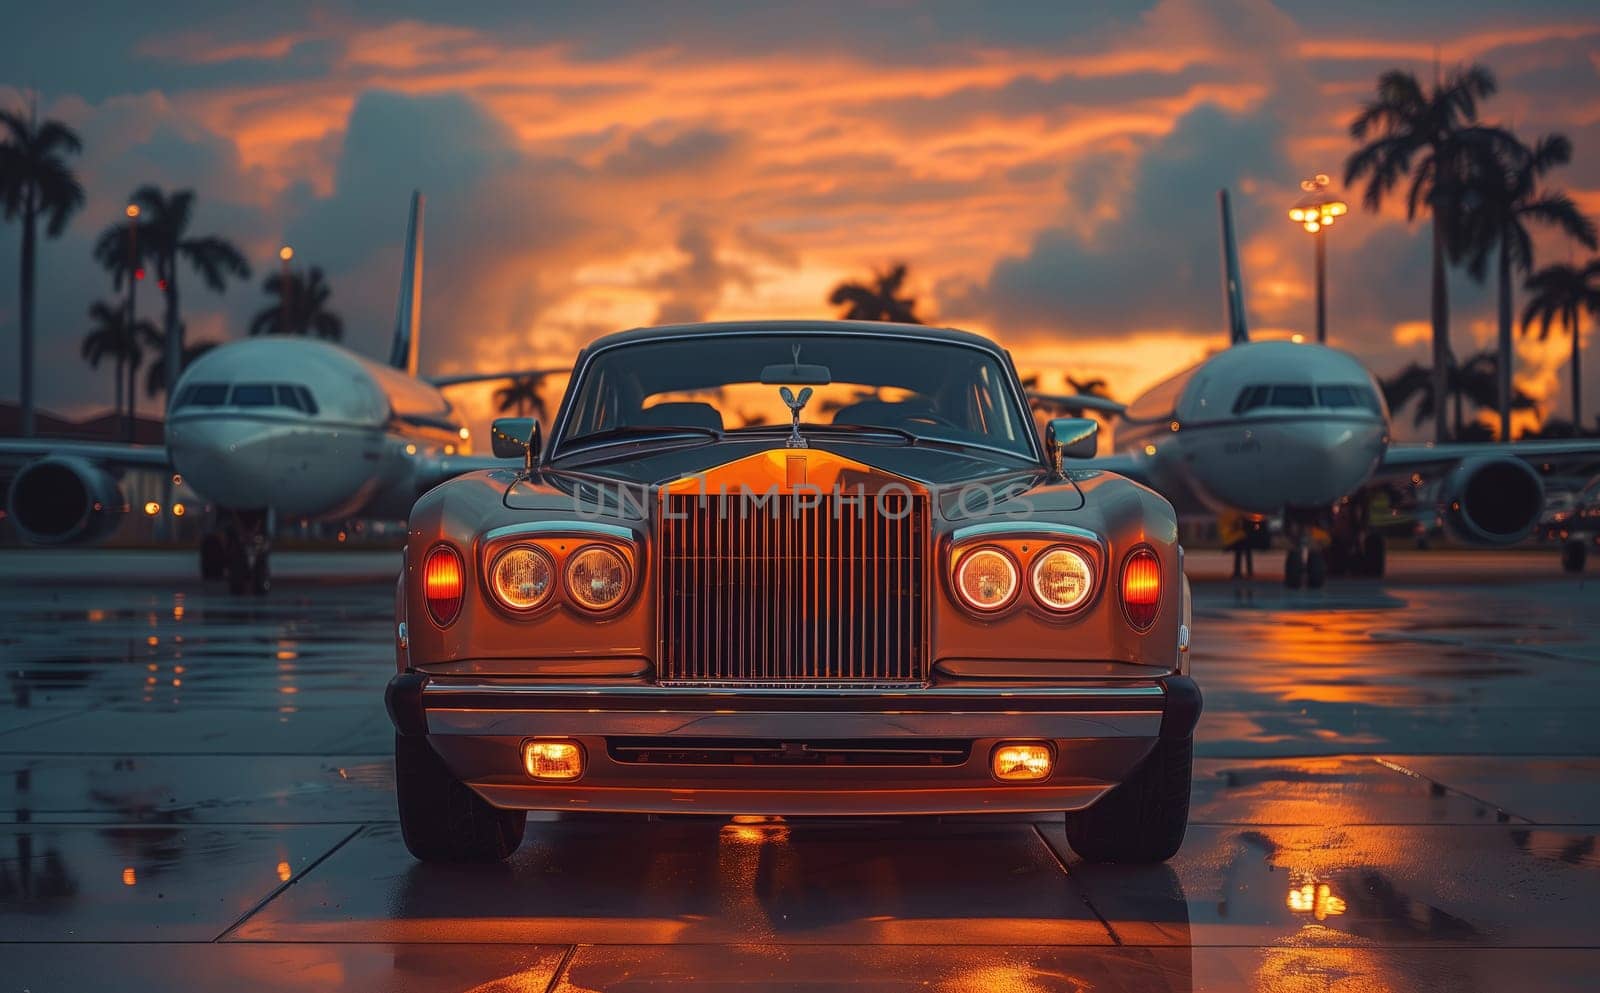 Rolls Royce parked by planes at sunset with sky, clouds reflecting on water by richwolf